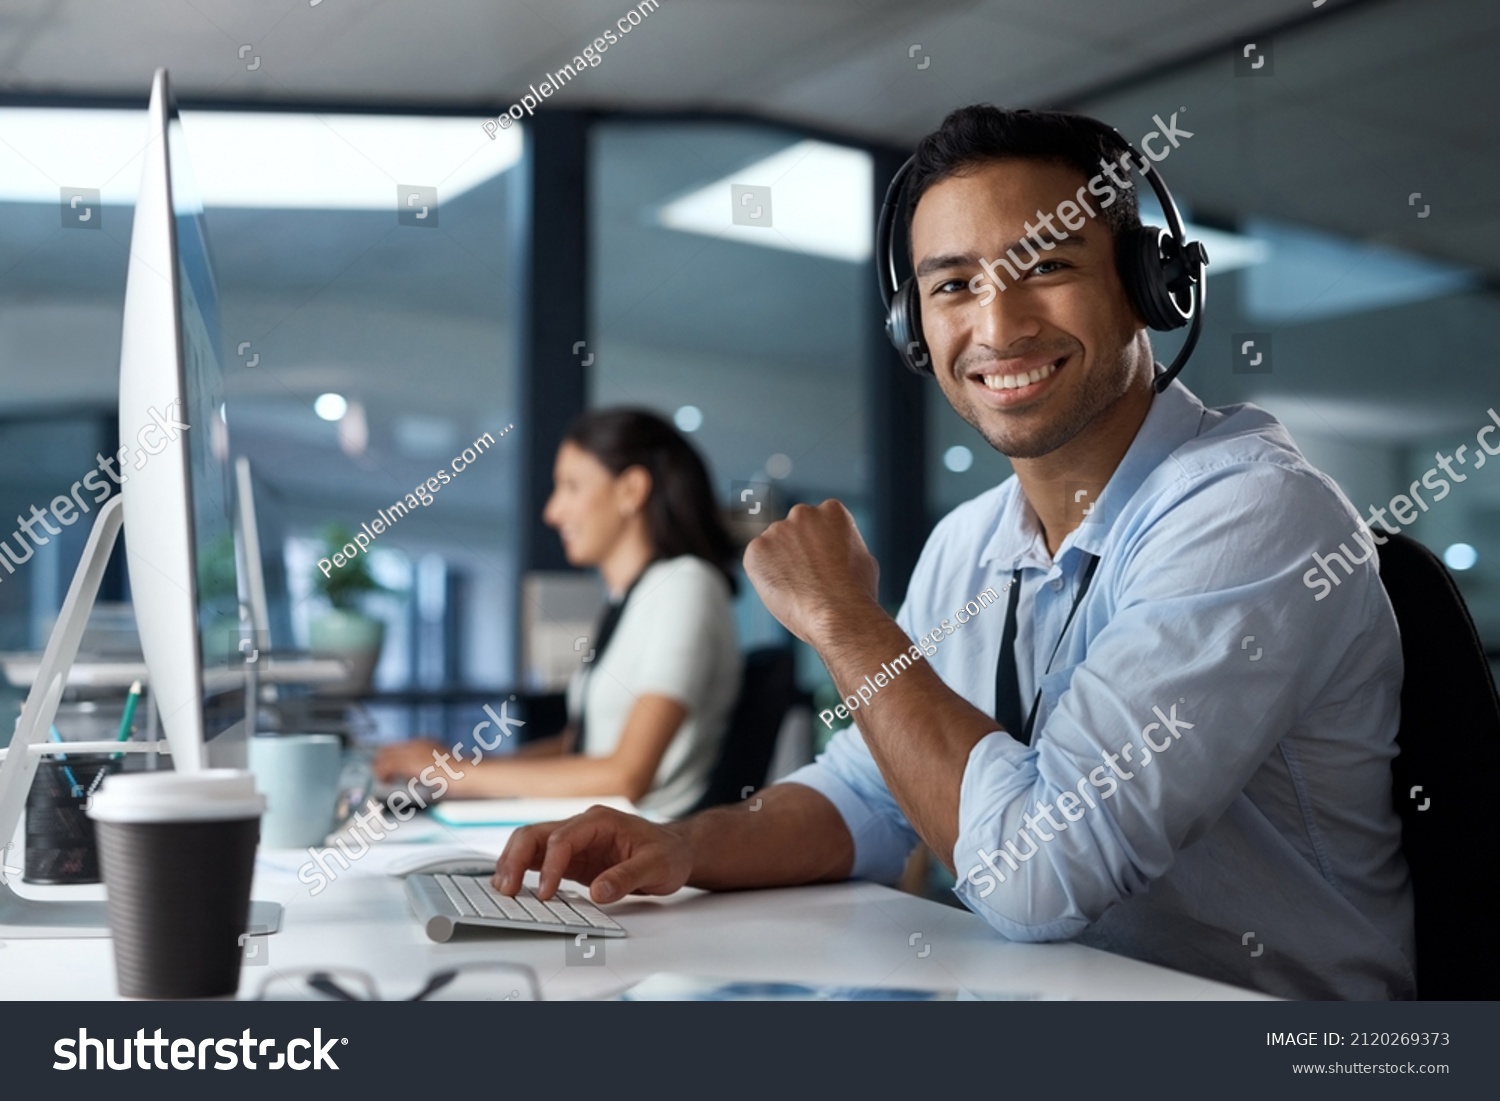 The customer is the real hero of this story. Portrait of a young man using a headset and computer in a modern office. #2120269373